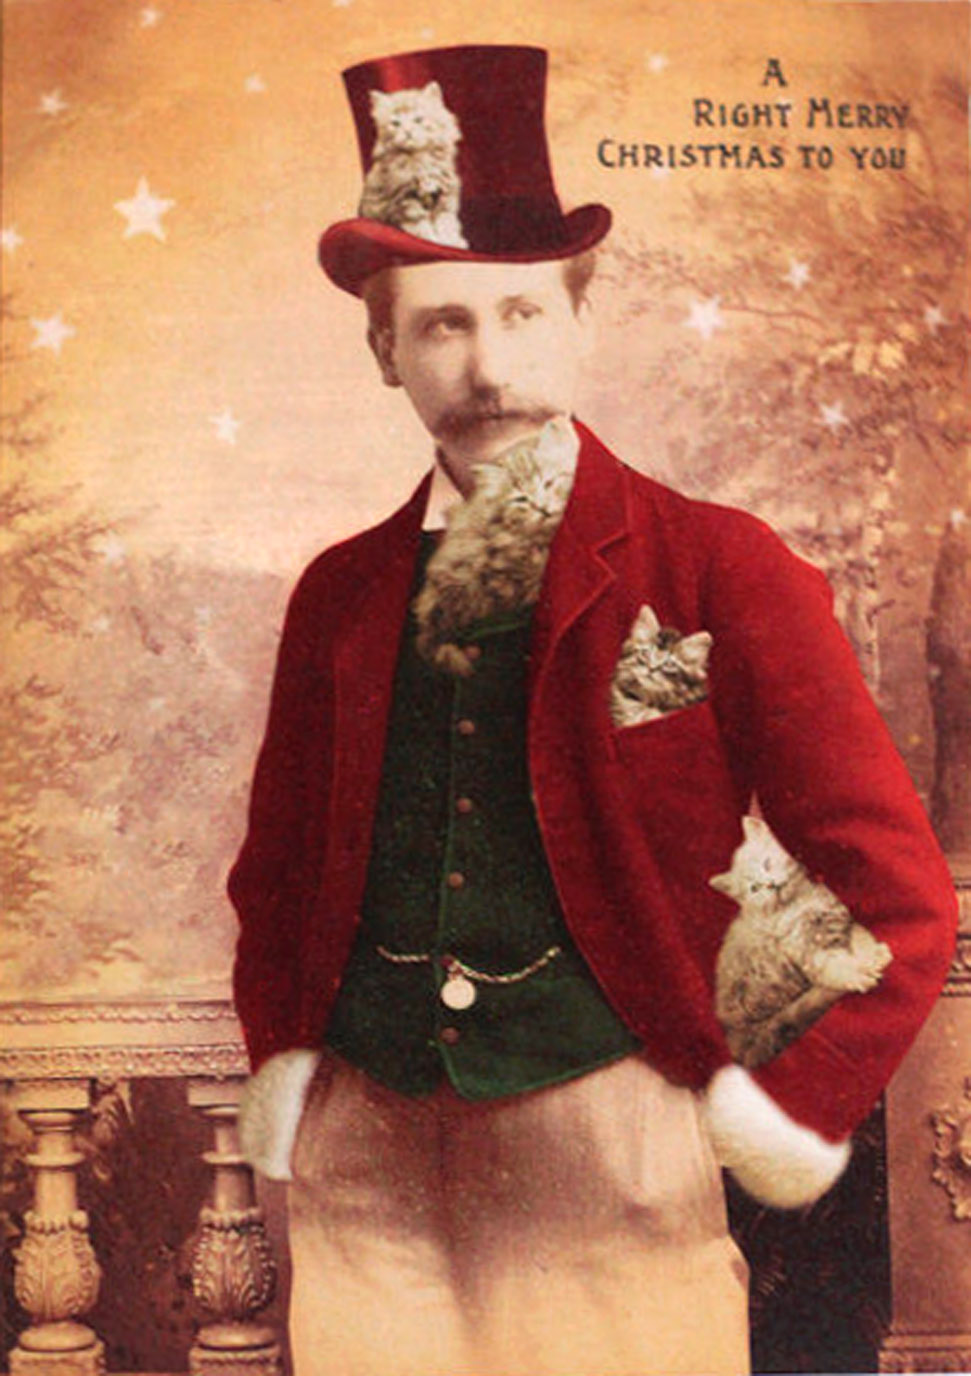 Man with kittens all over - funny vintage Christmas card